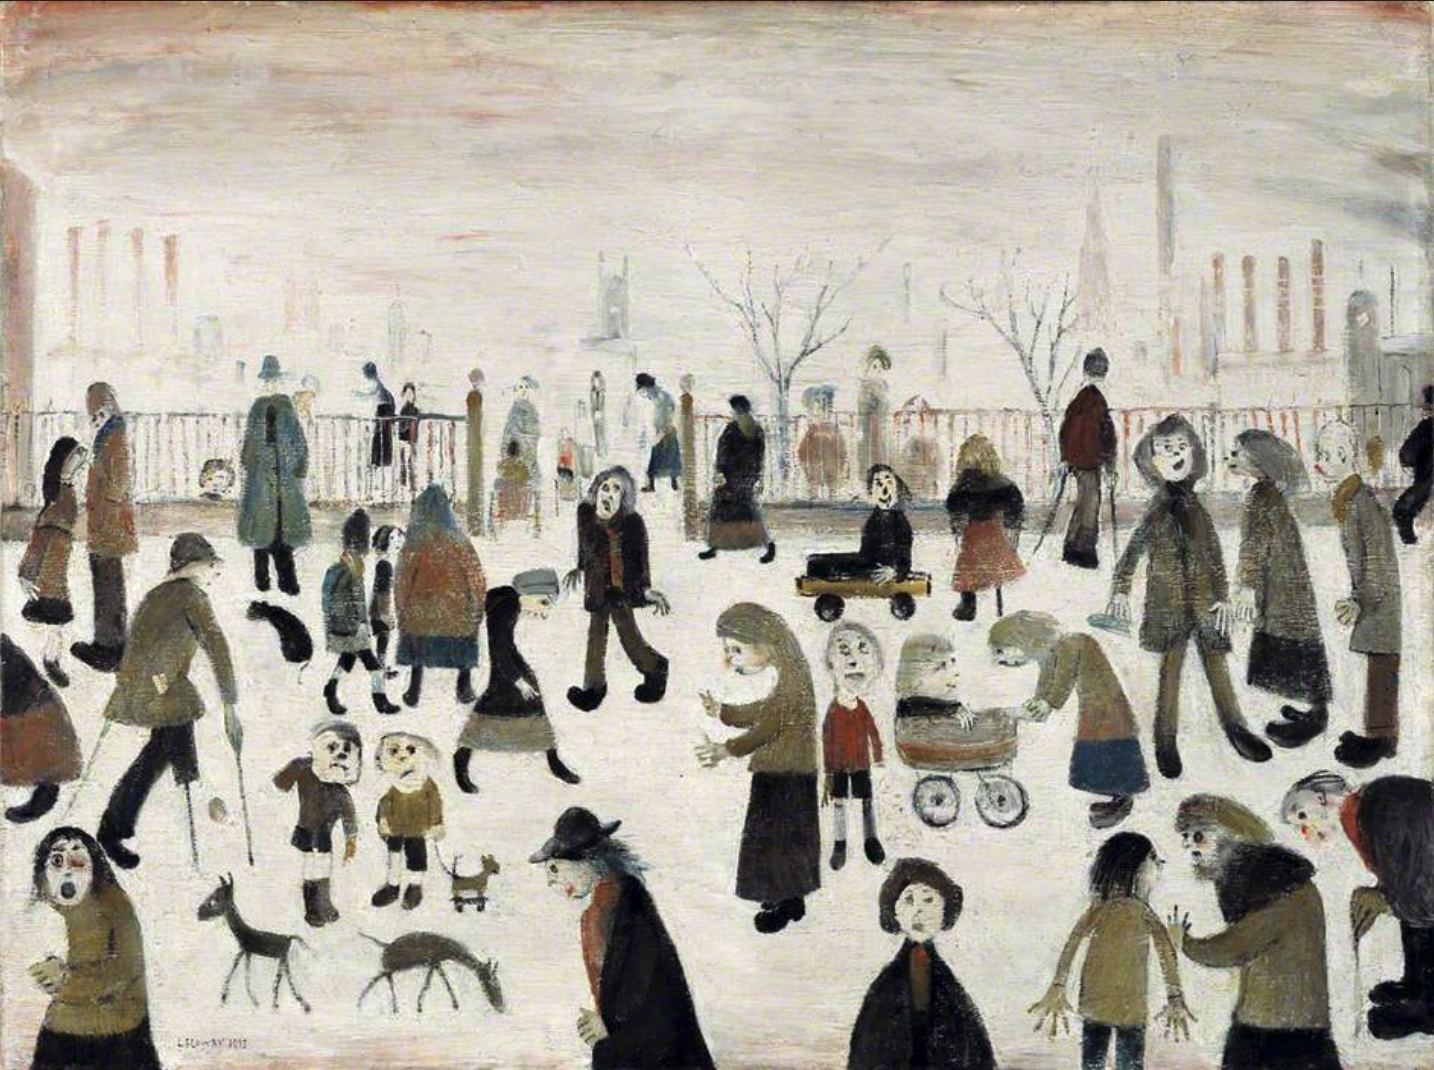 In a Park (1963) by Laurence Stephen Lowry (1887 - 1976), English artist.